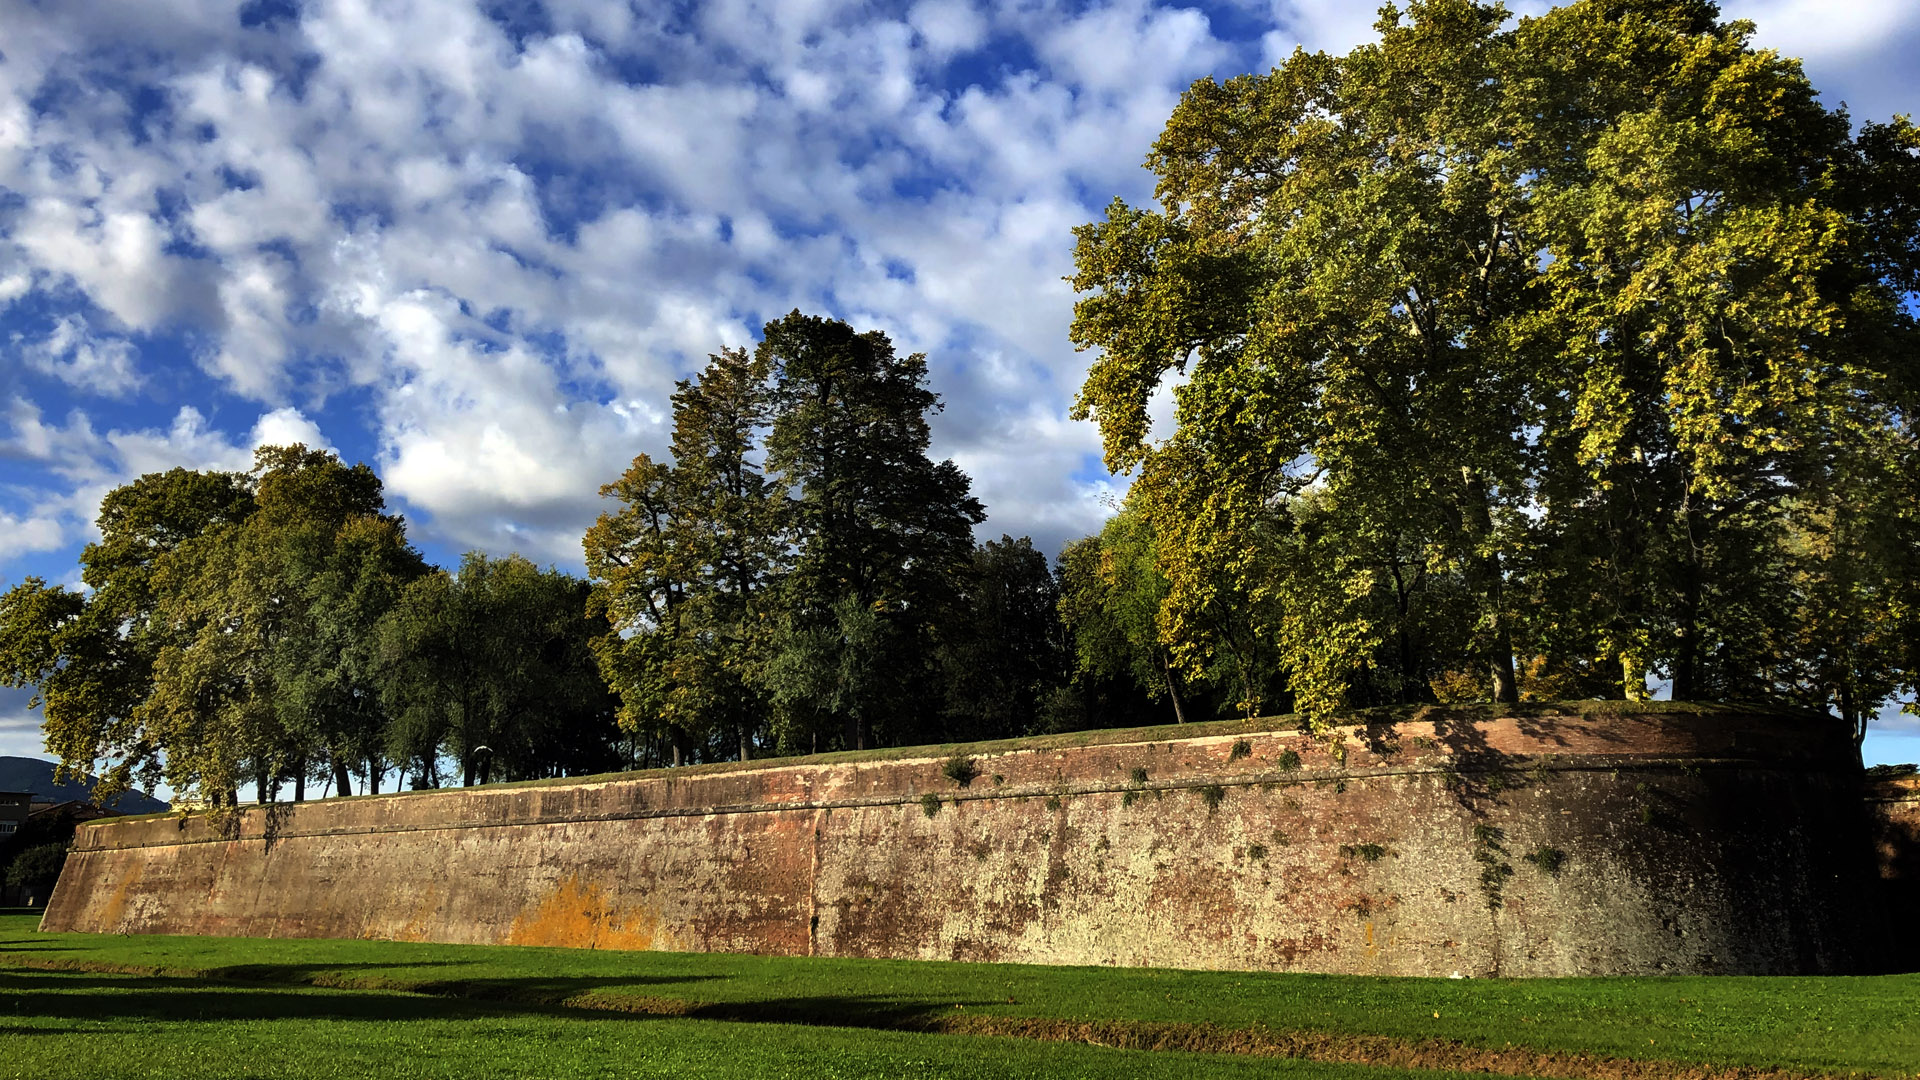 The ramparts of the Walls of Lucca